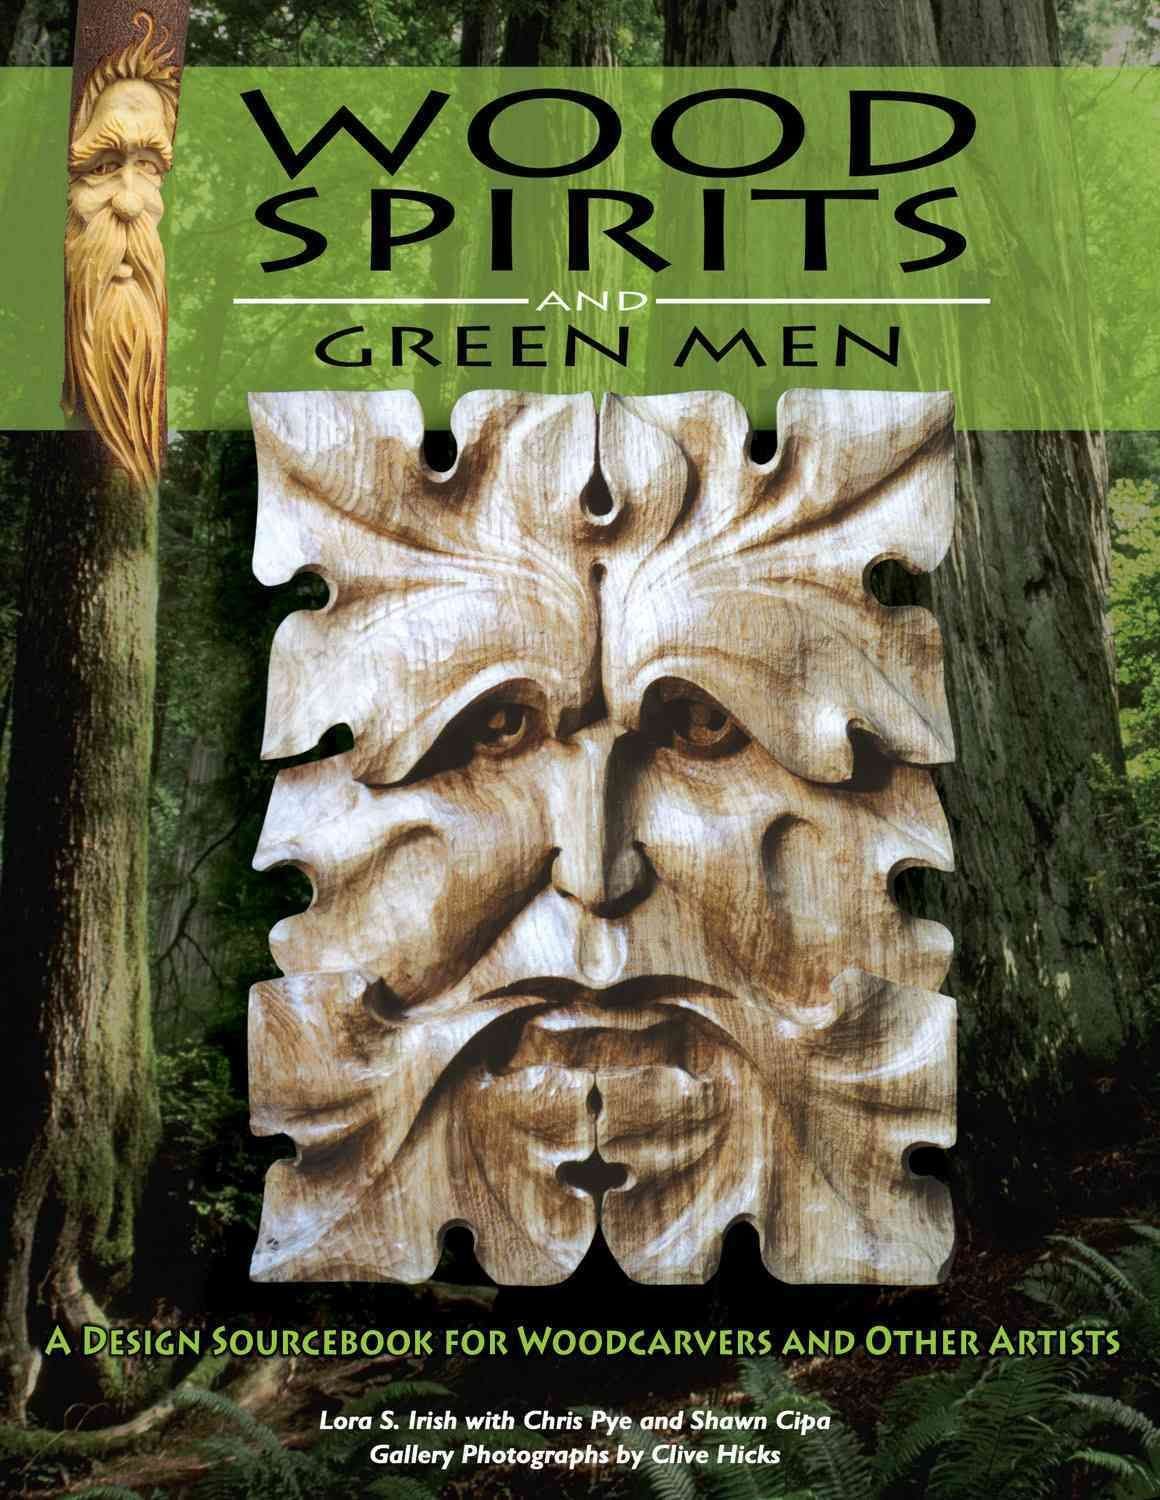 Fox Chapel - Relief Carving Wood Spirits Revised Edition